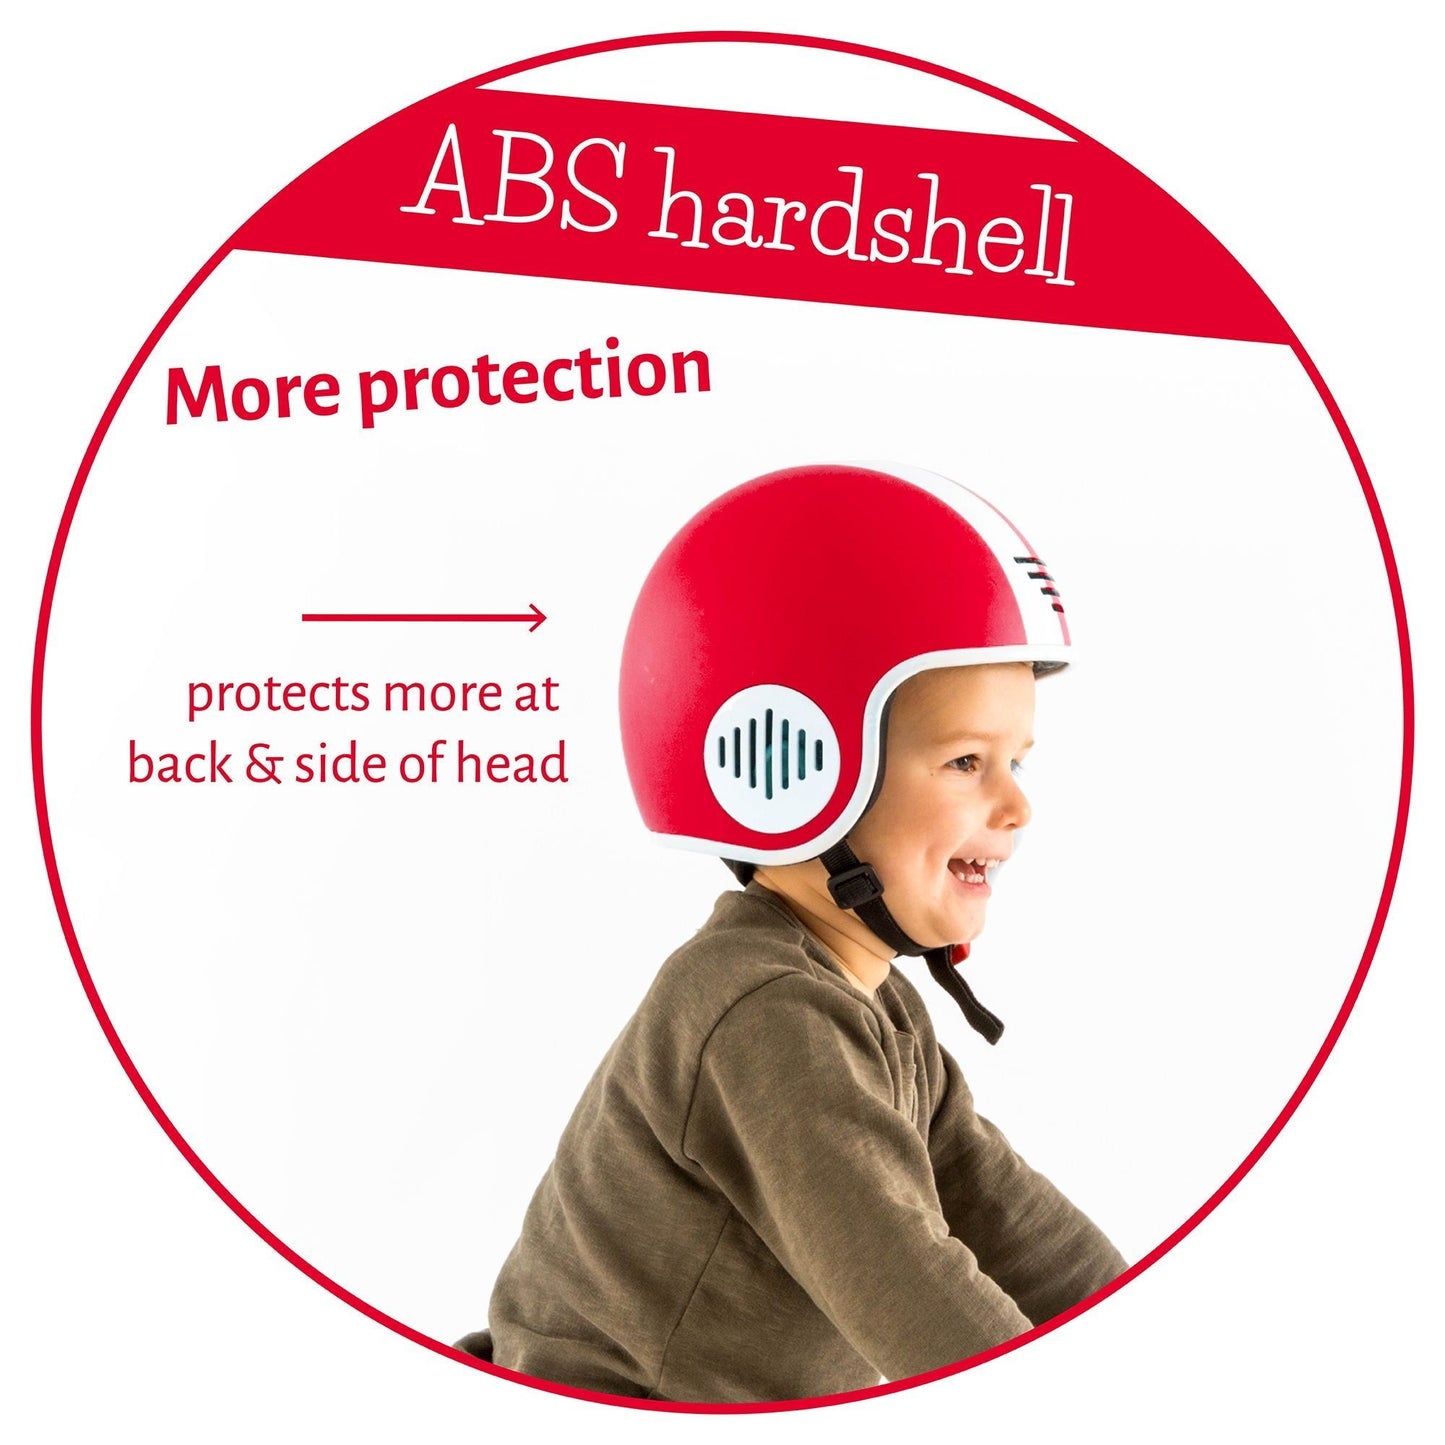 Chillafish Kids Helmet Bobbi XS Red with ABS hardshell for more protection